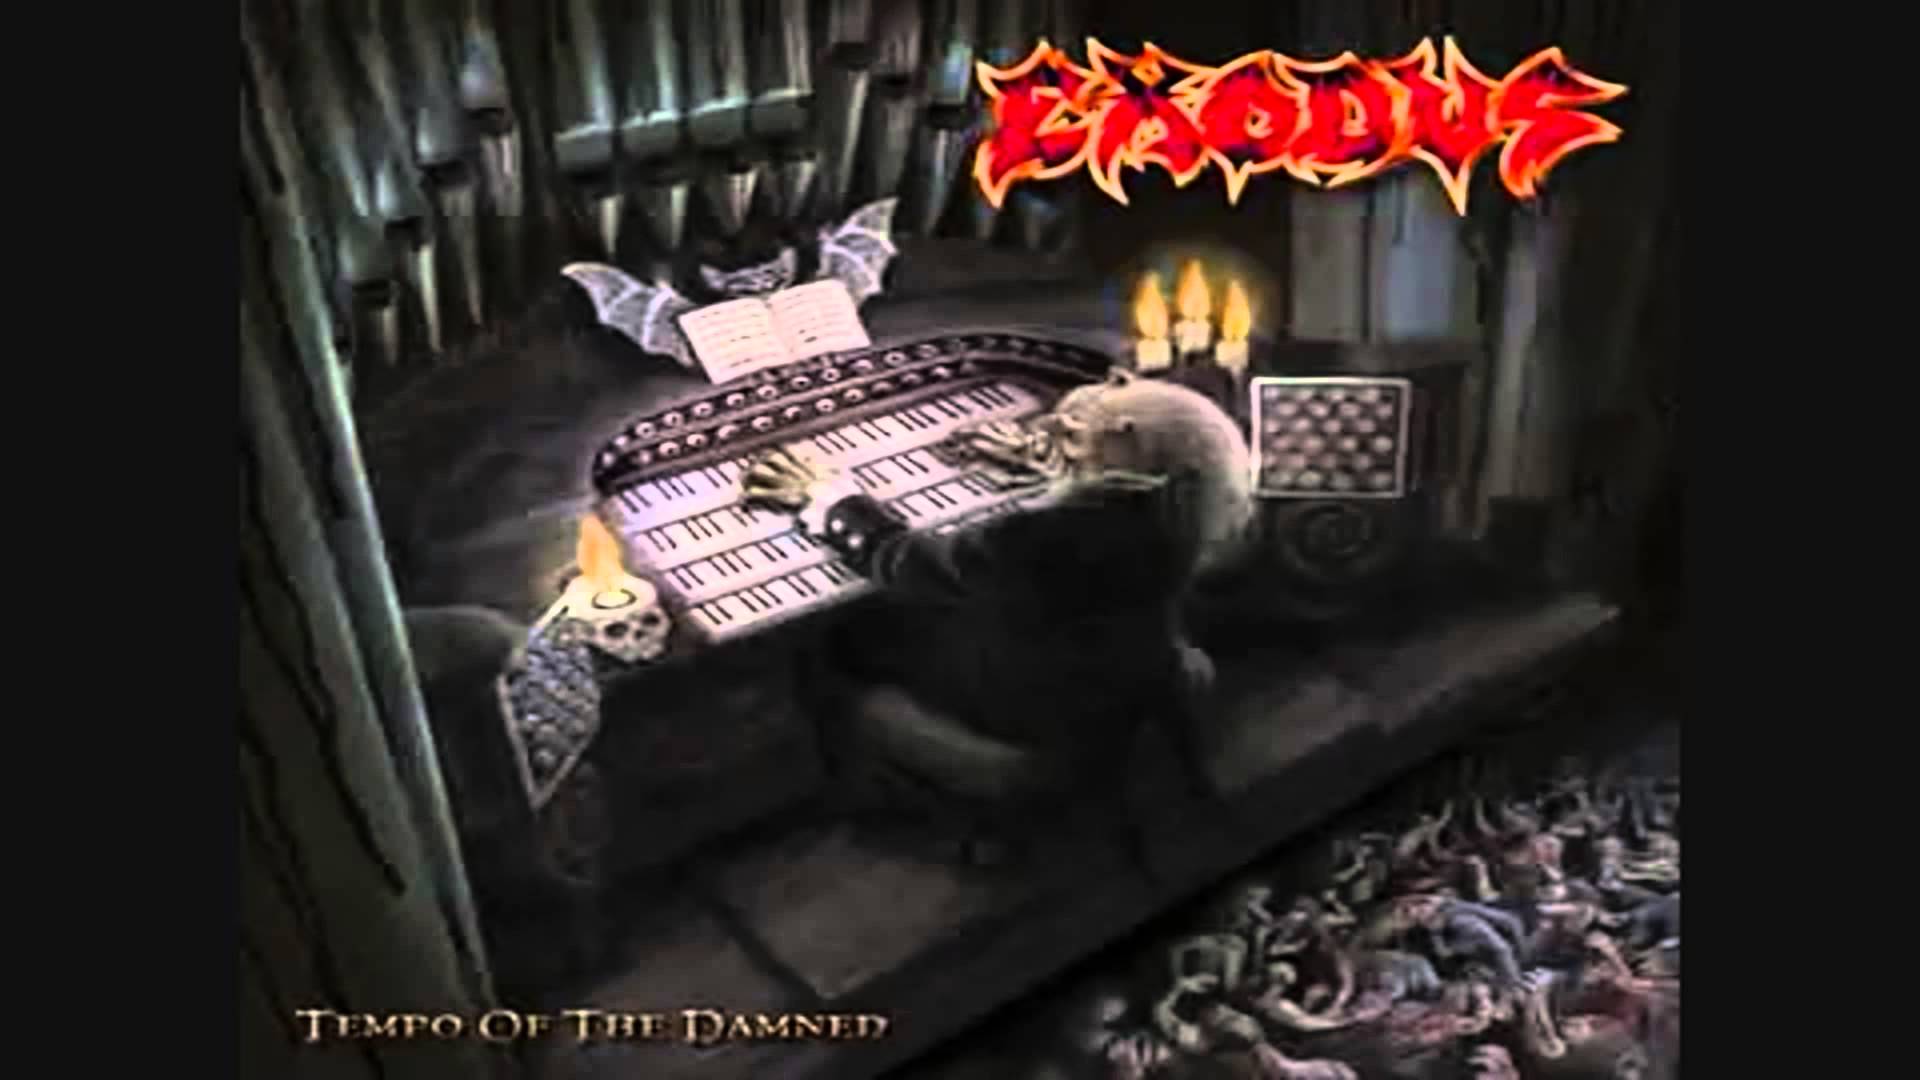 Exodus Wallpaper - Exodus Tempo Of The Damned , HD Wallpaper & Backgrounds